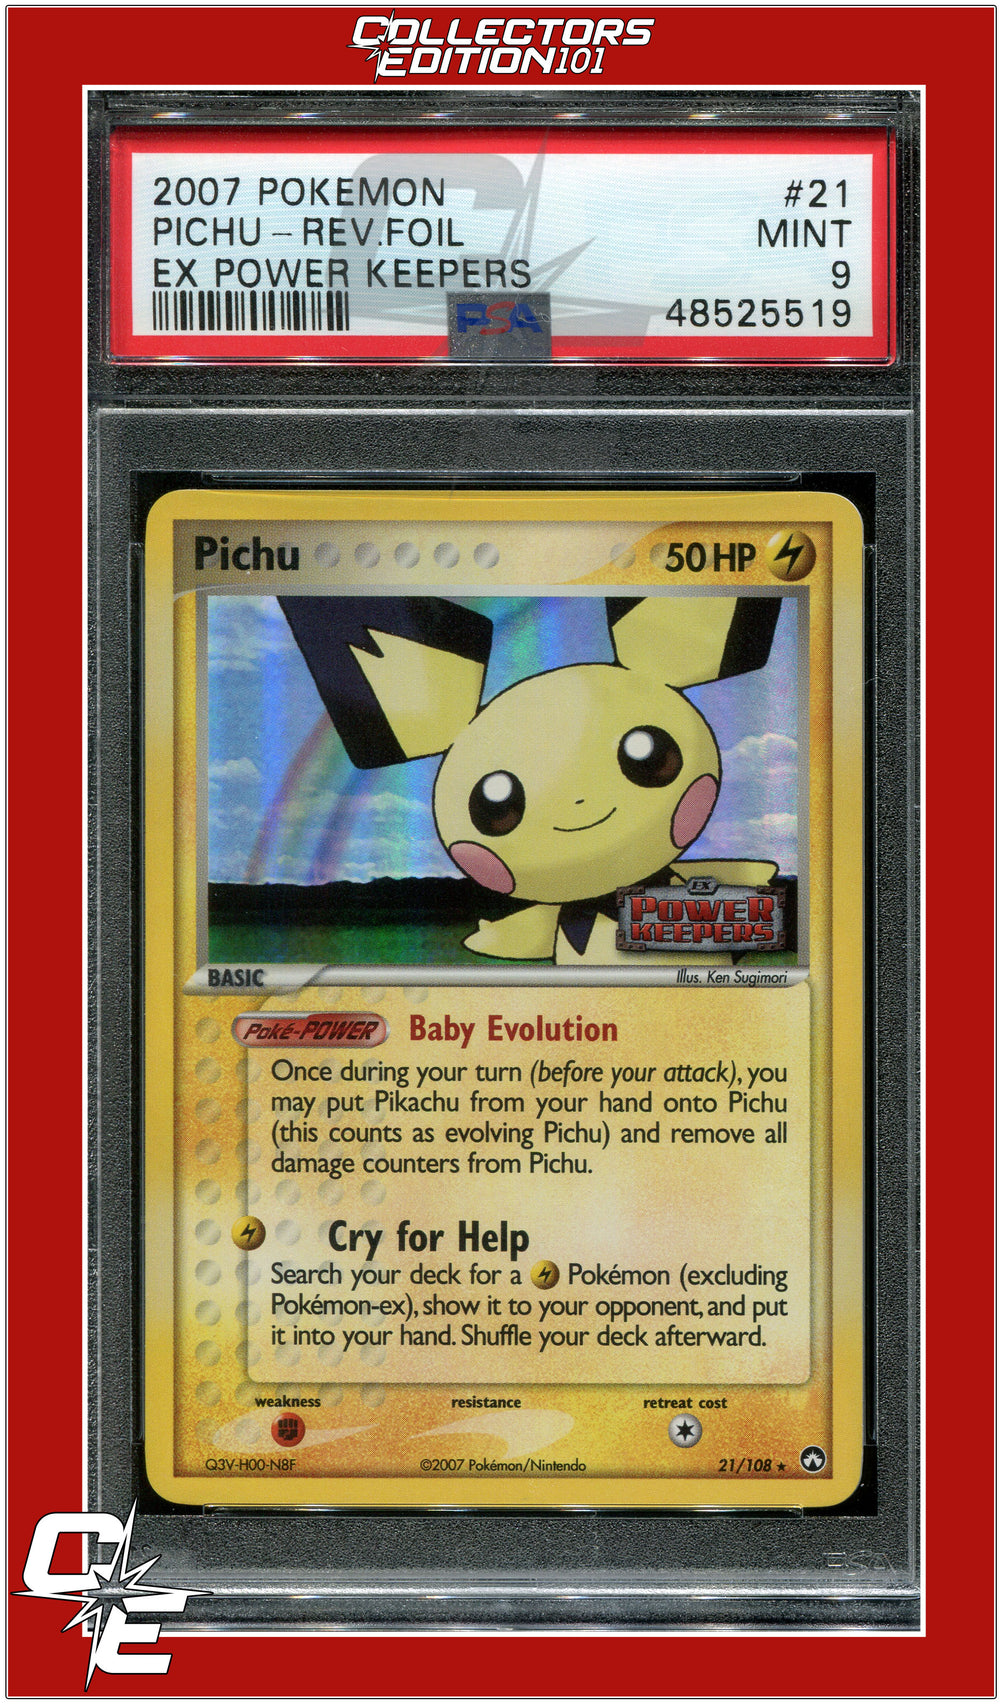 EX Power Keepers 21 Pichu Reverse Foil PSA 9